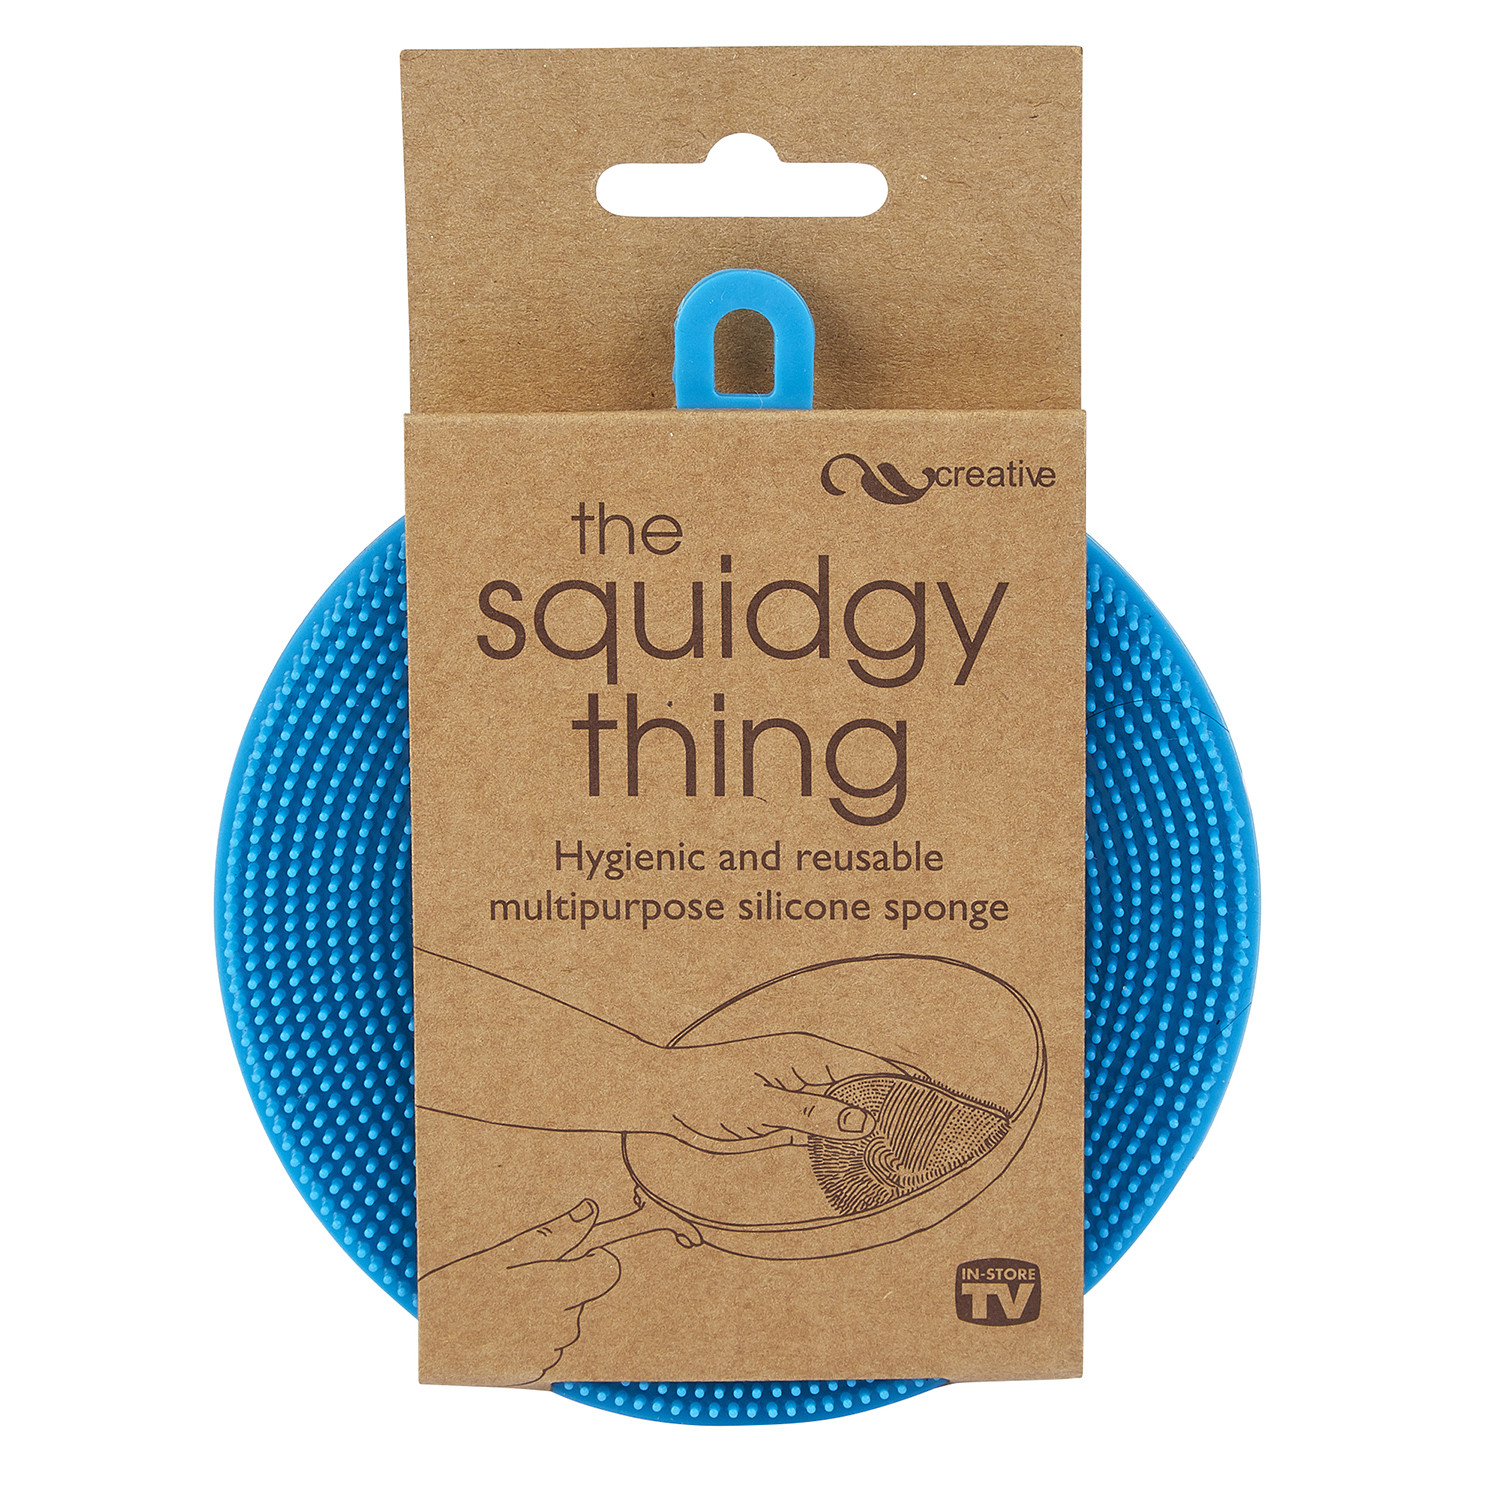 The Squidgy Thing Image 1